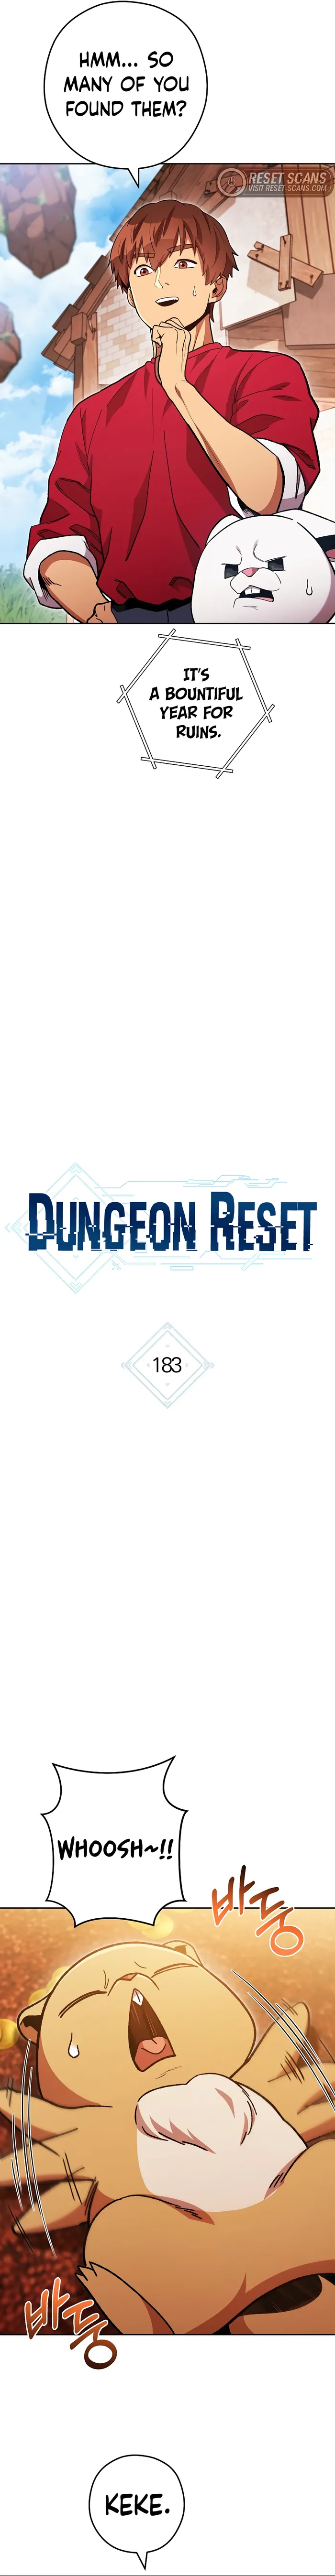 Dungeon Reset chapter 183